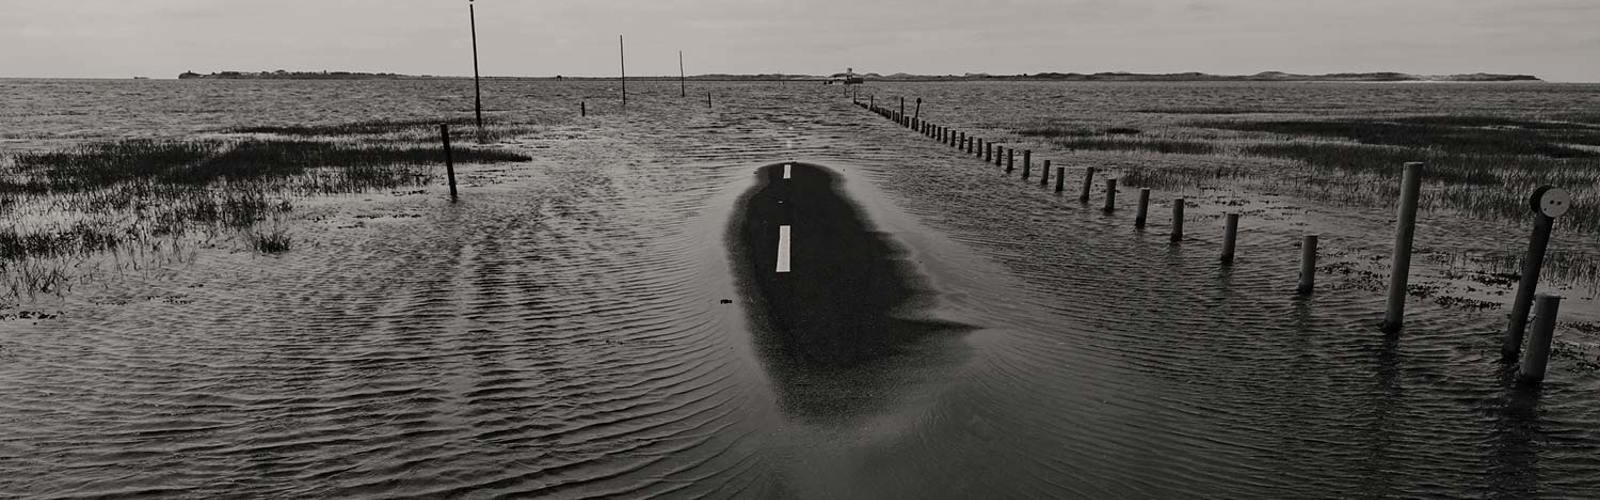 A flooded road